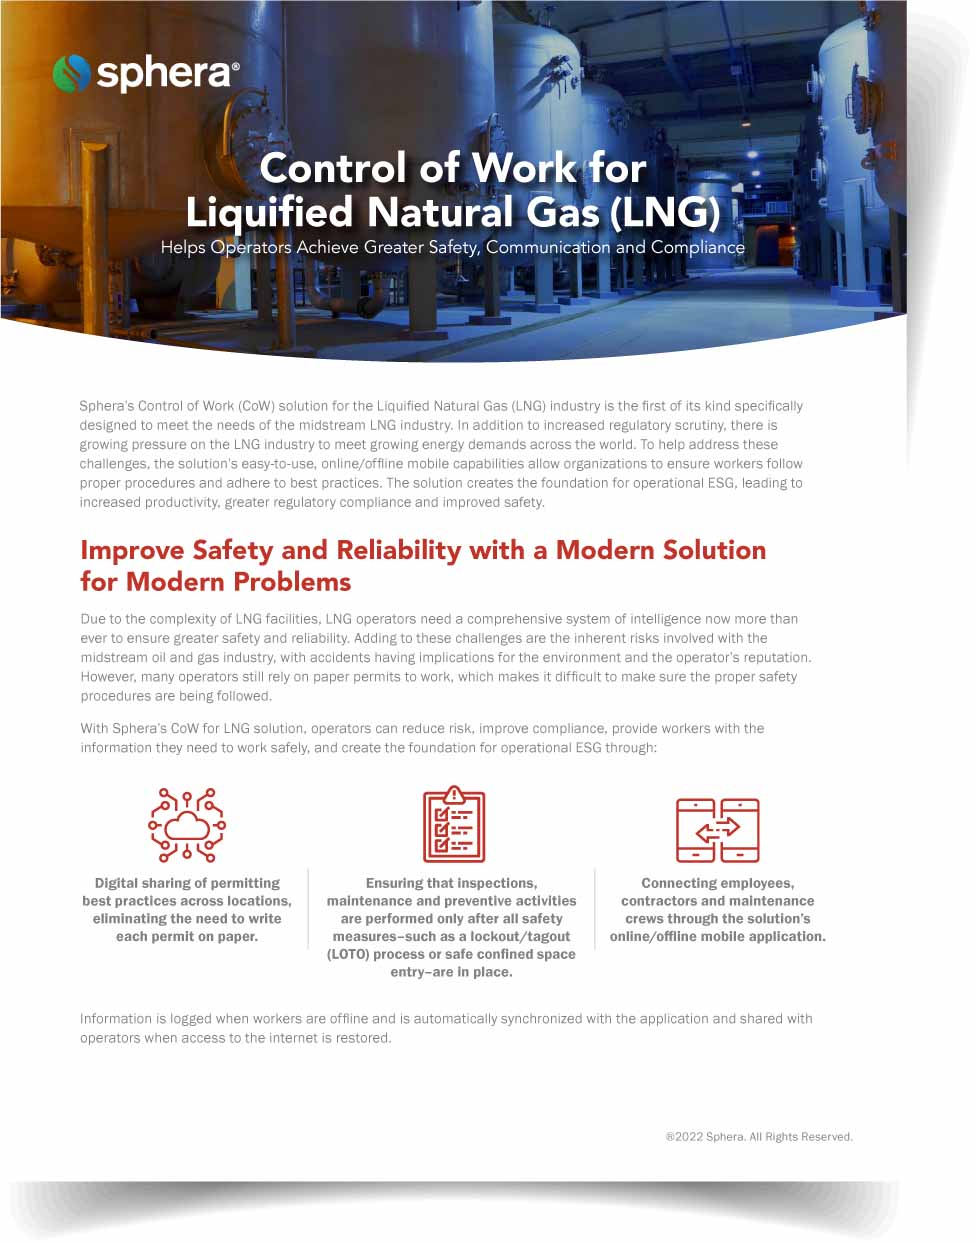 Control of Work for Liquefied Natural Gas (LNG)